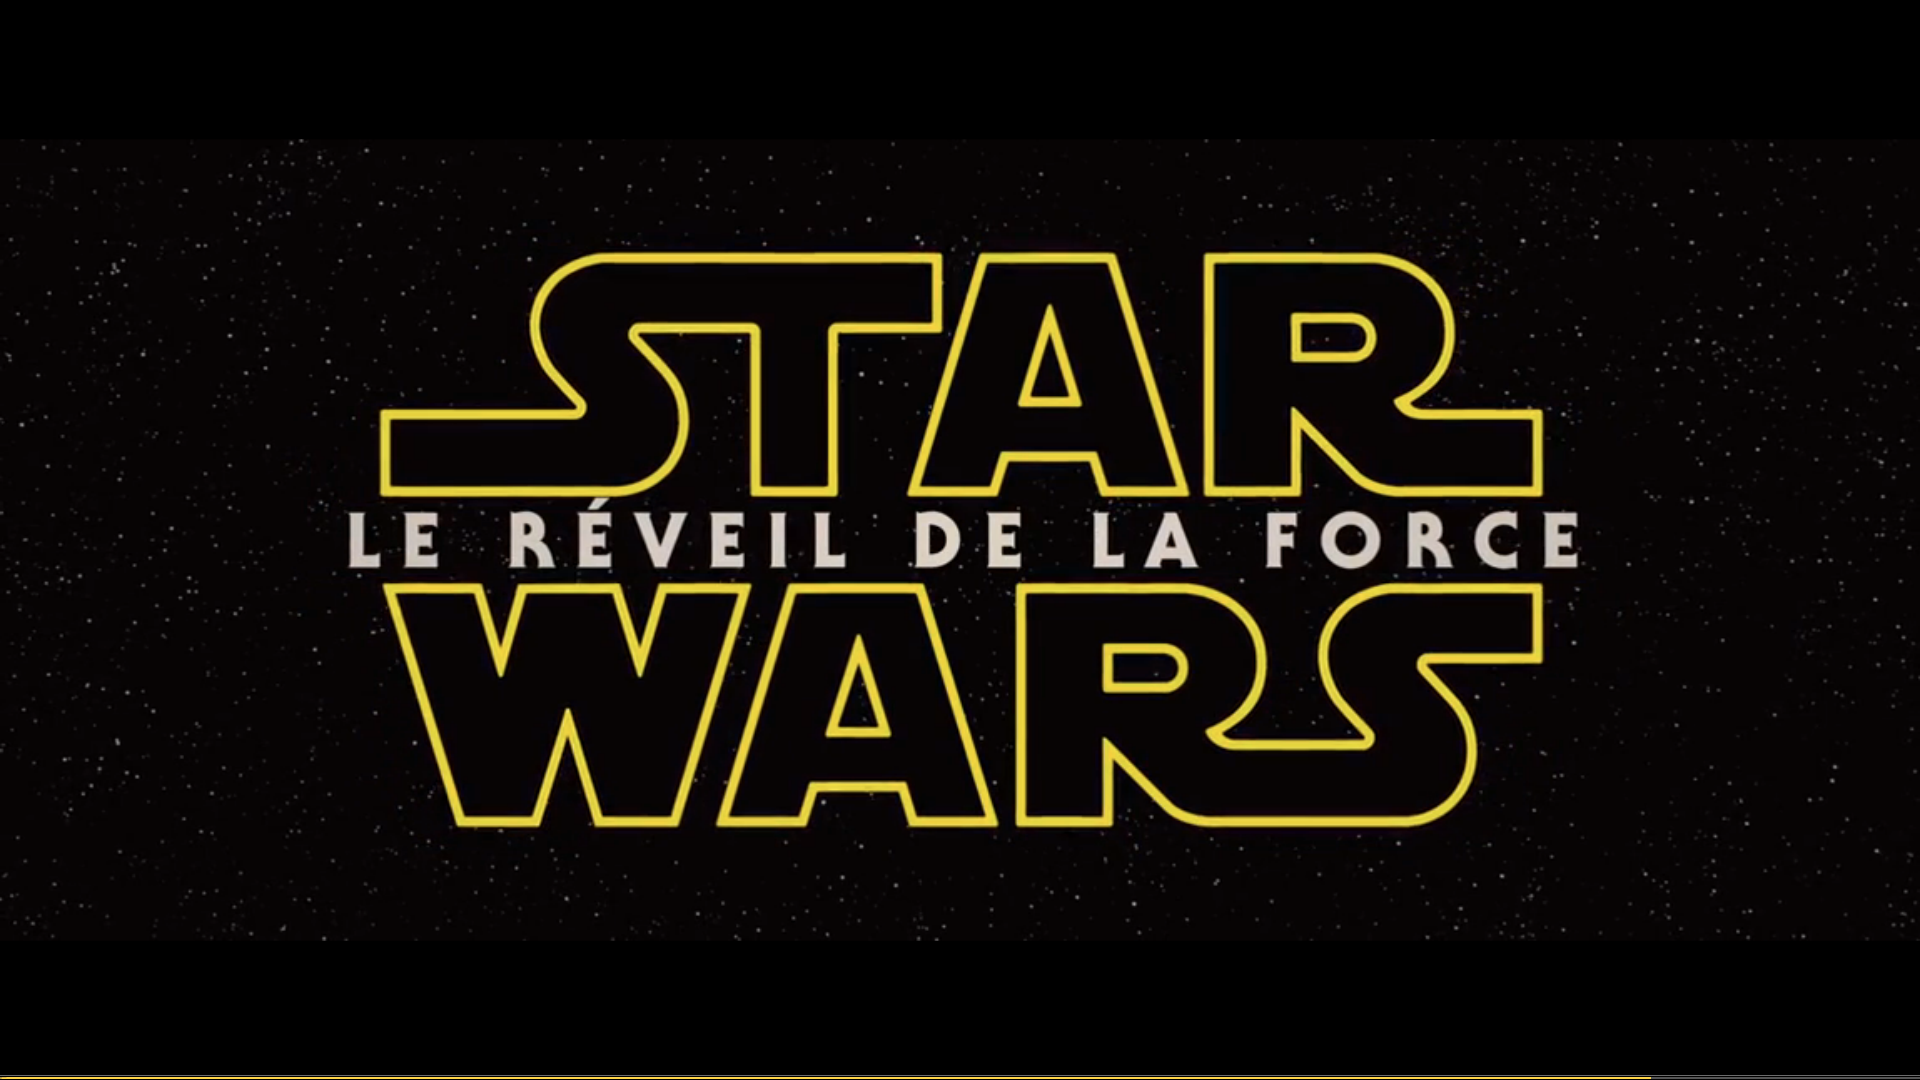 Star Wars 7 : L’édition Collector Blu Ray 3D arrive le?